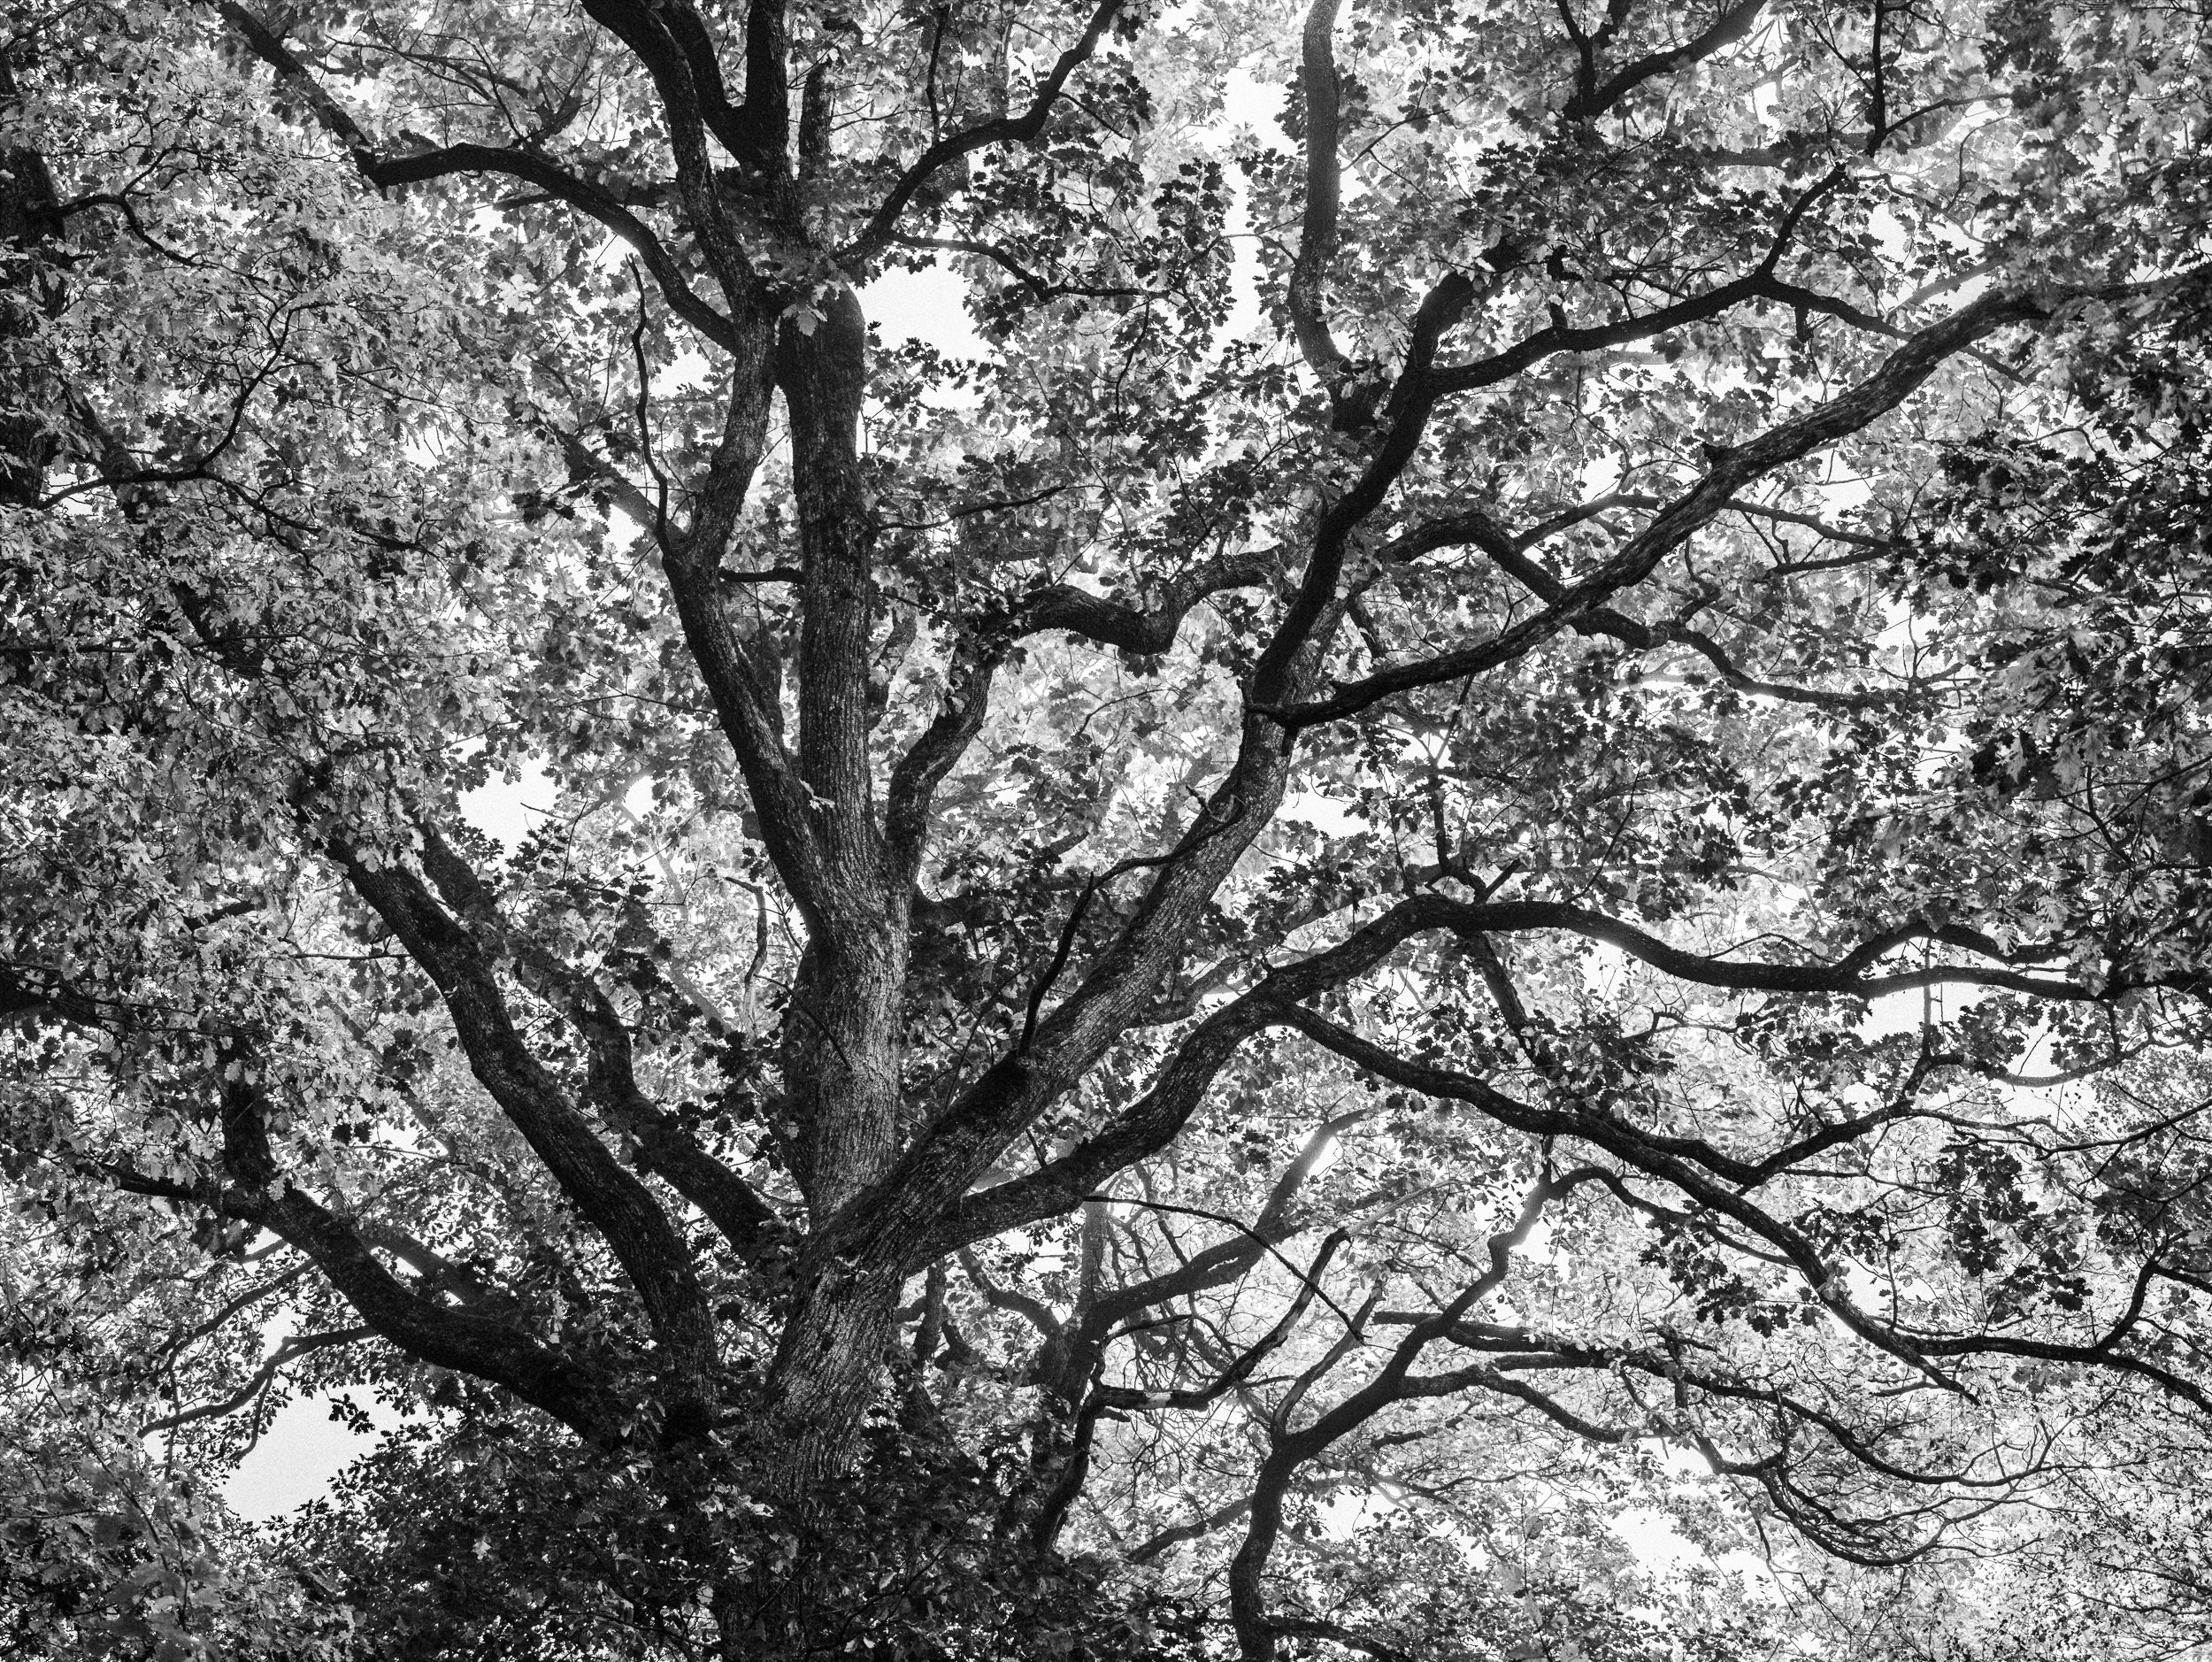 Black and white conversion to focus on the shapes and structure of the trees - Switzerland, Rafael Rojas.jpg